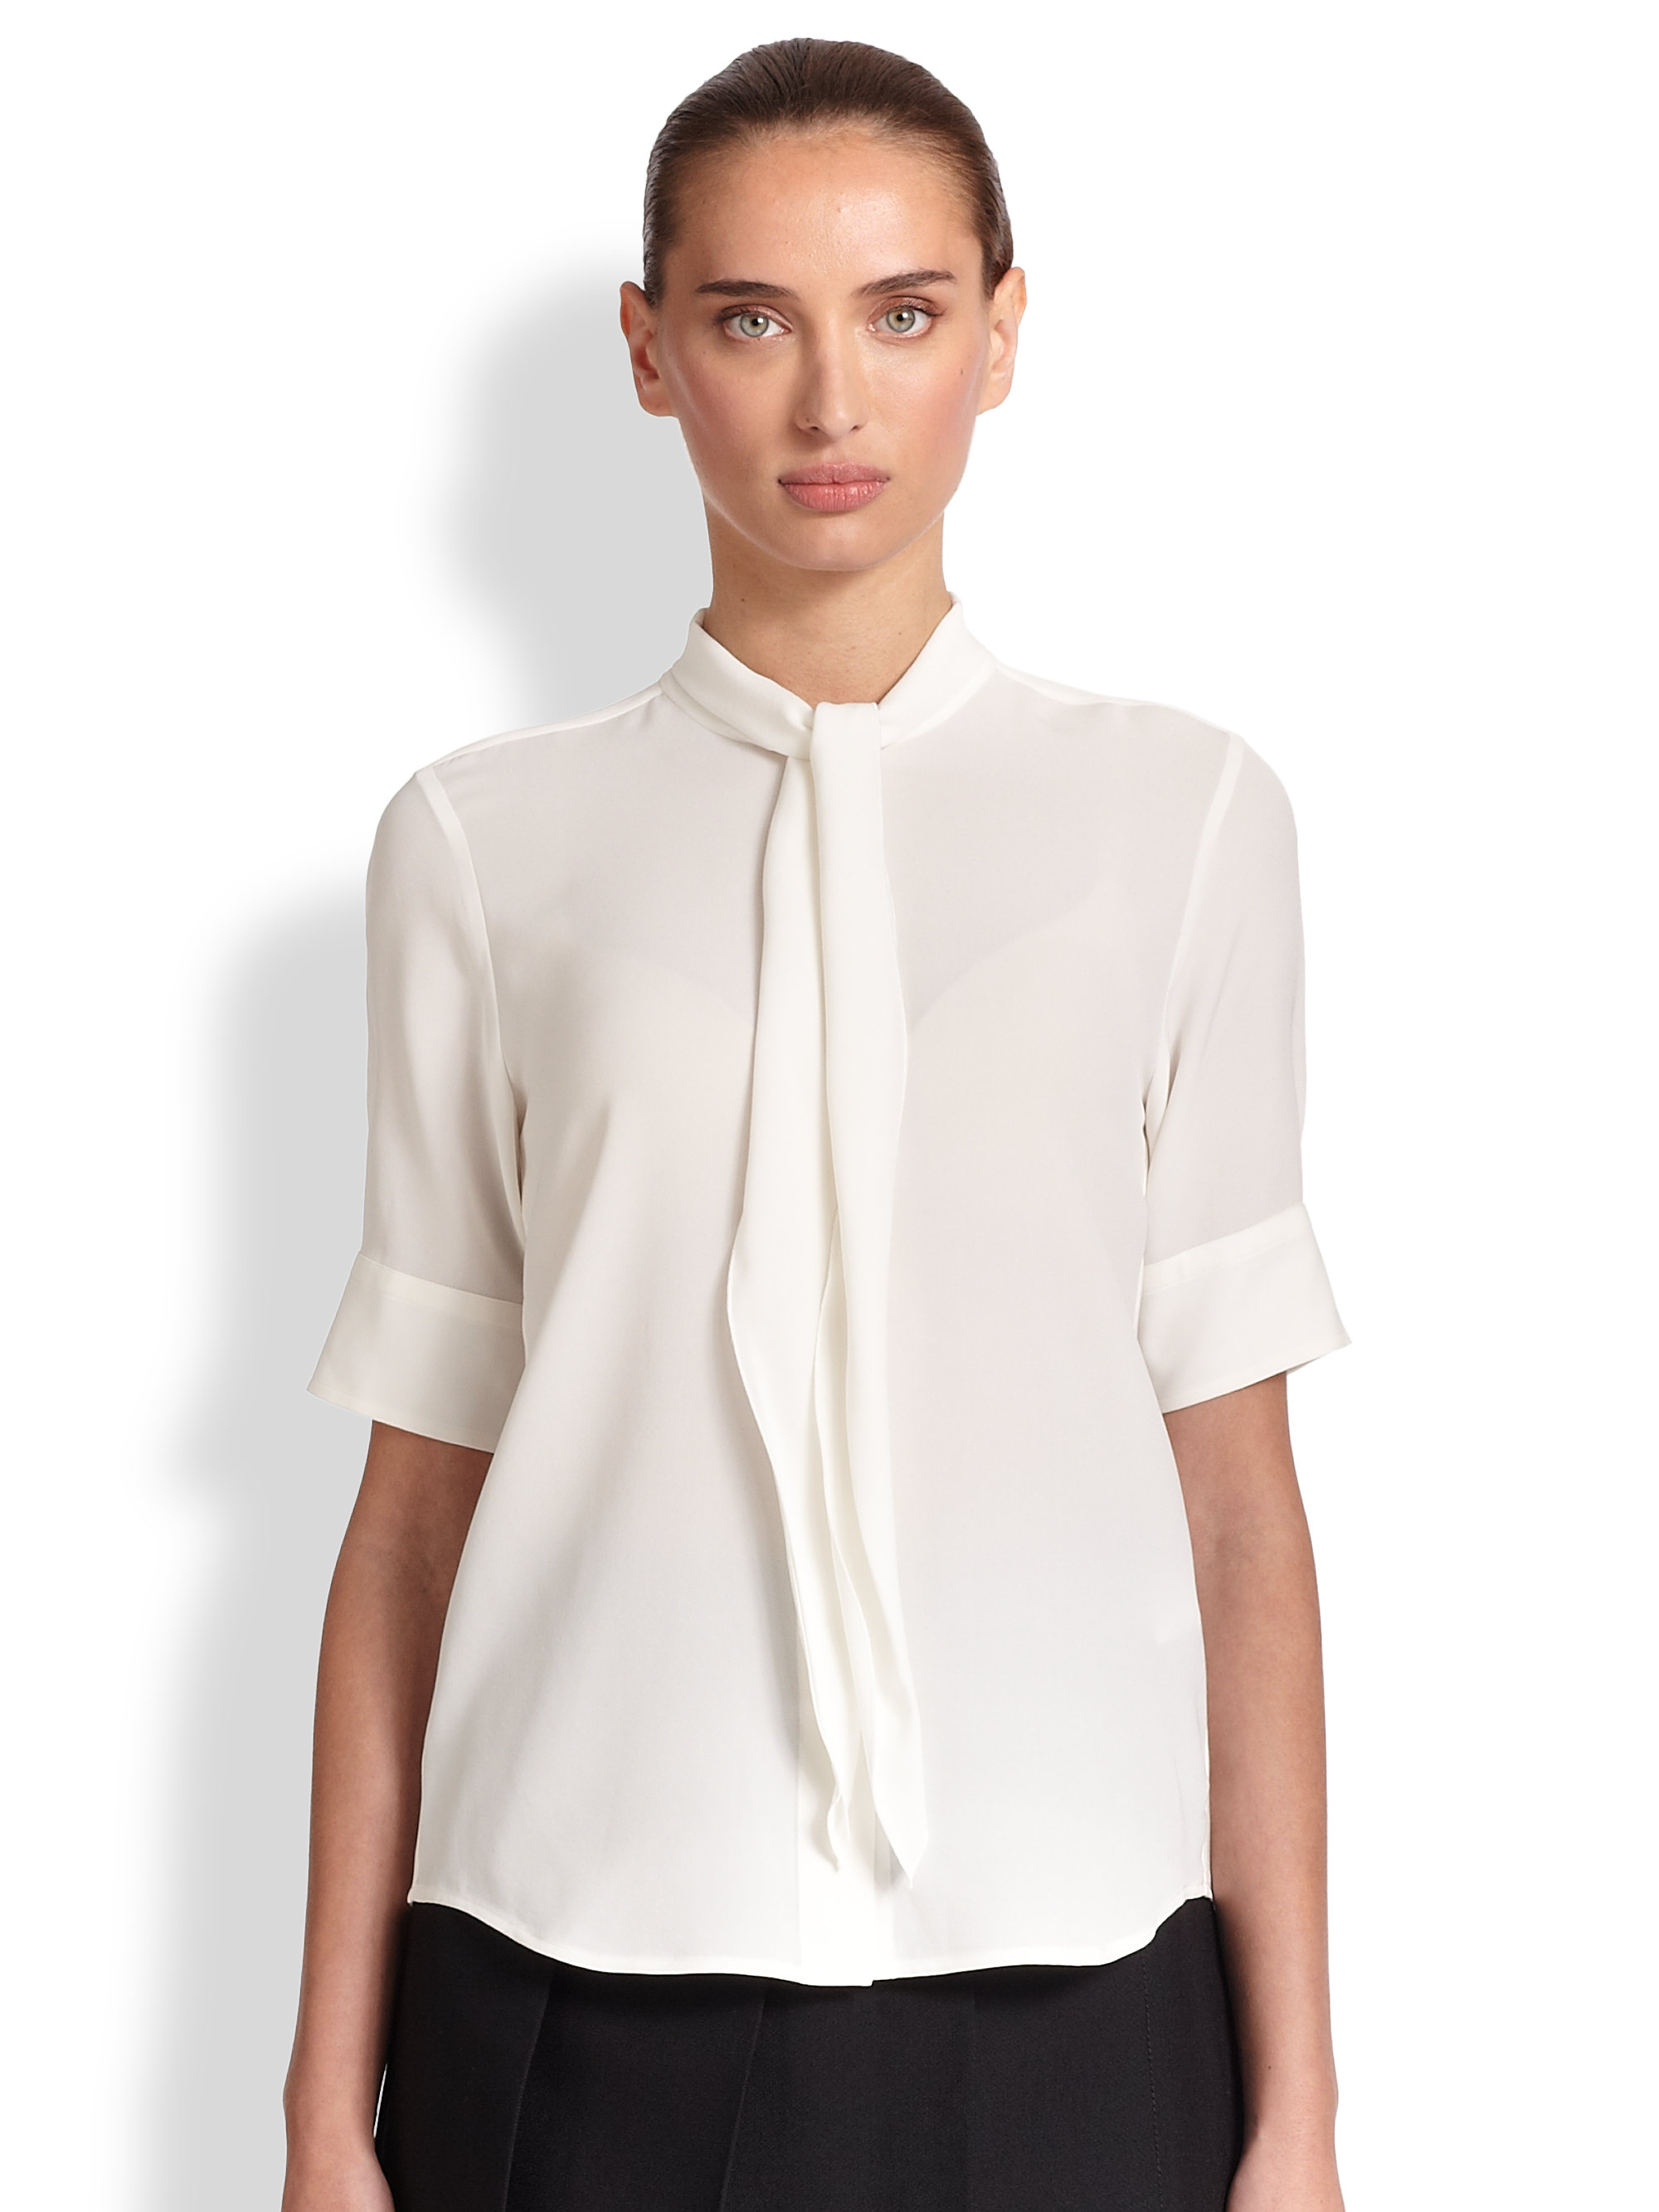 Lyst - Marc Jacobs Silk Crepe Blouse in White